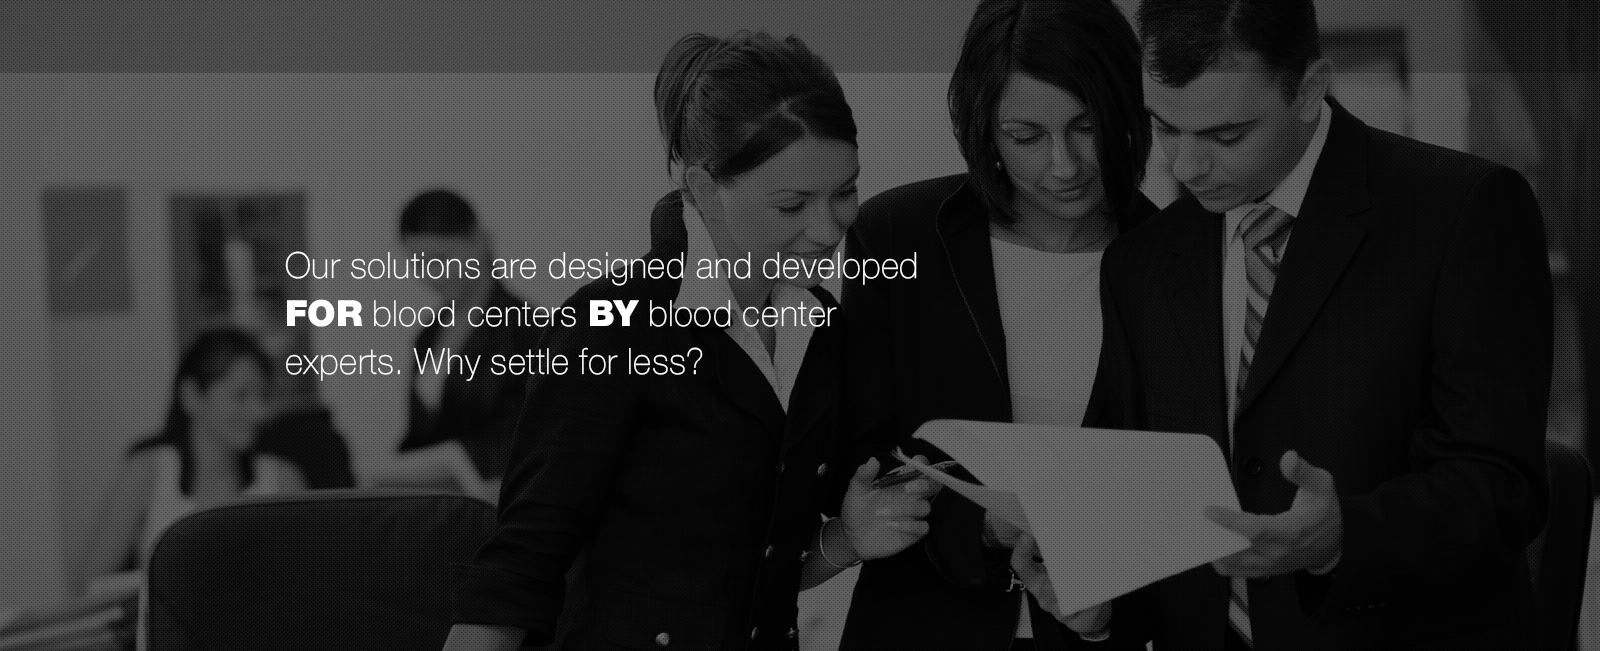 Software developed FOR blood centers BY blood center experts. Why settle for less?